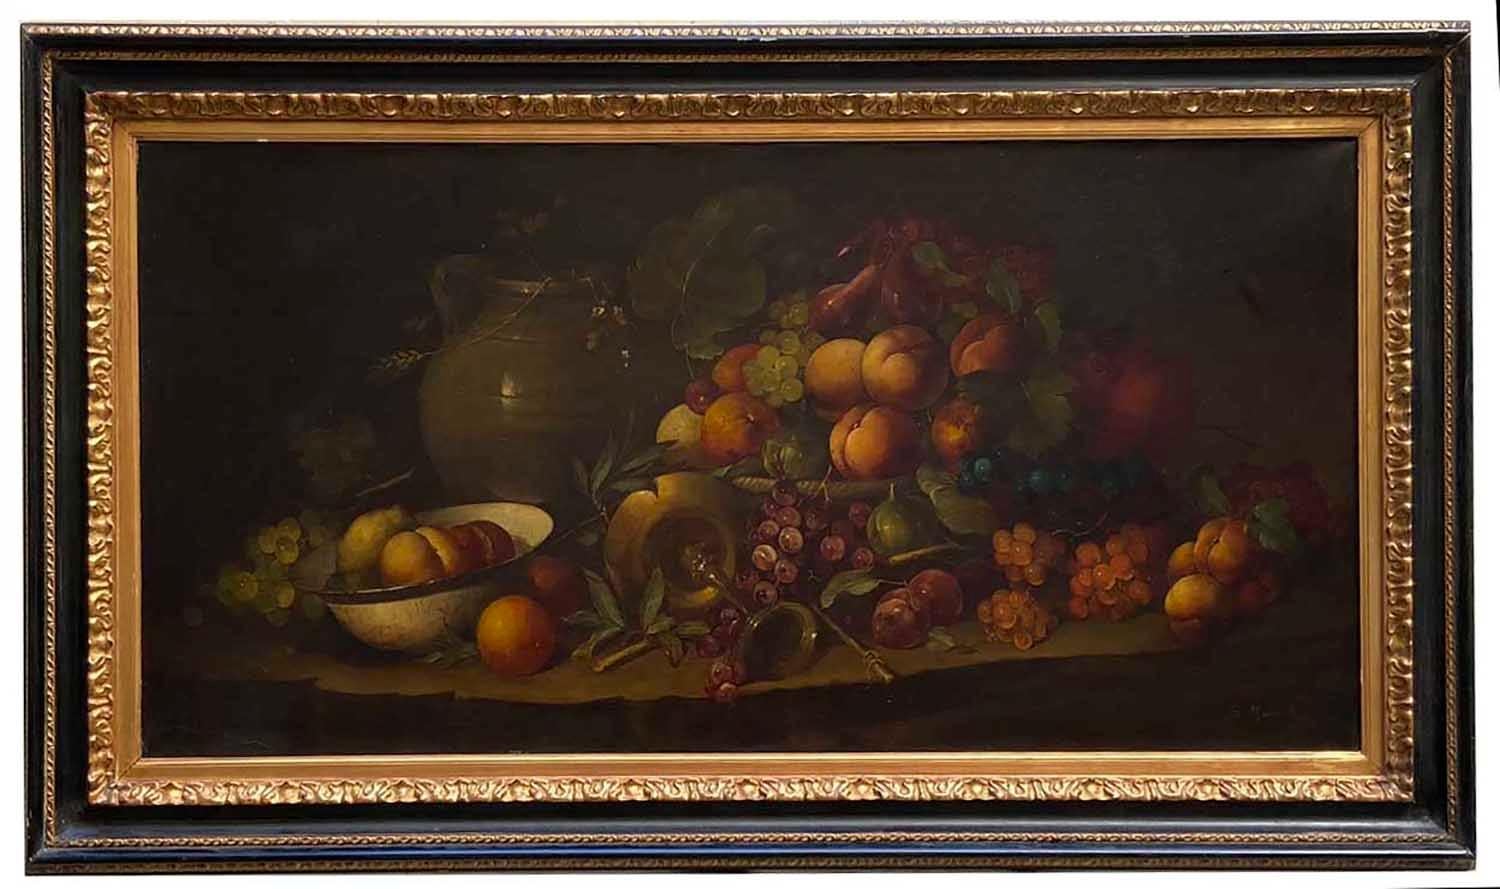 STILL LIFE - In the Manner of Adriaen Coorte - Oil on Canvas  Italian Painting